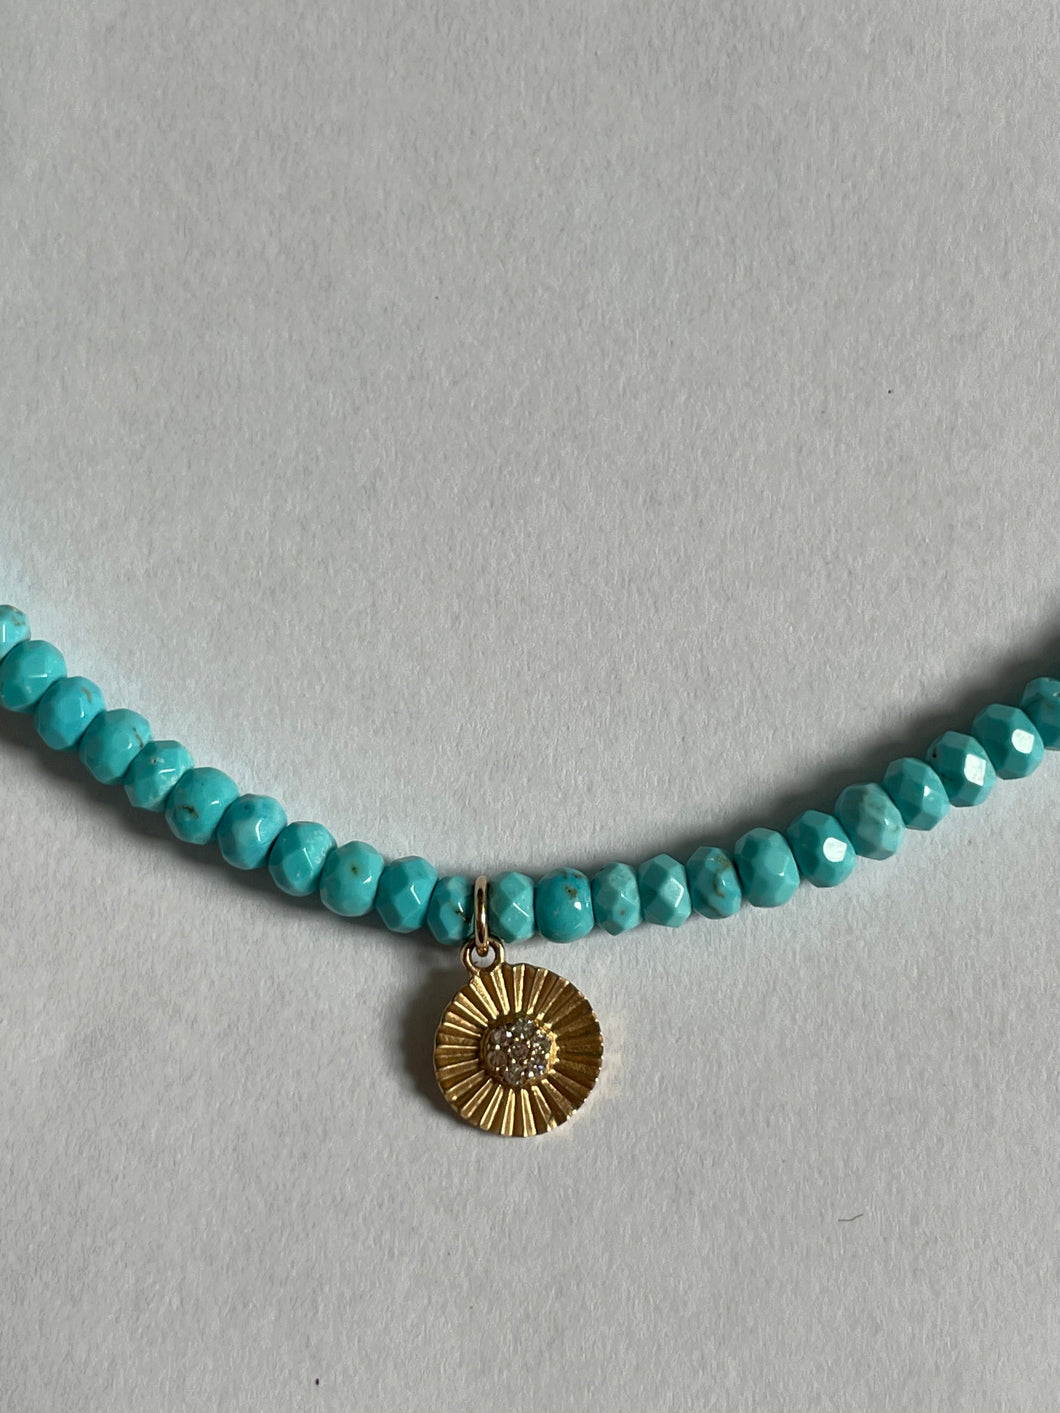 Faceted Turquoise Beaded Necklace with Fluted Diamond Disk - 16